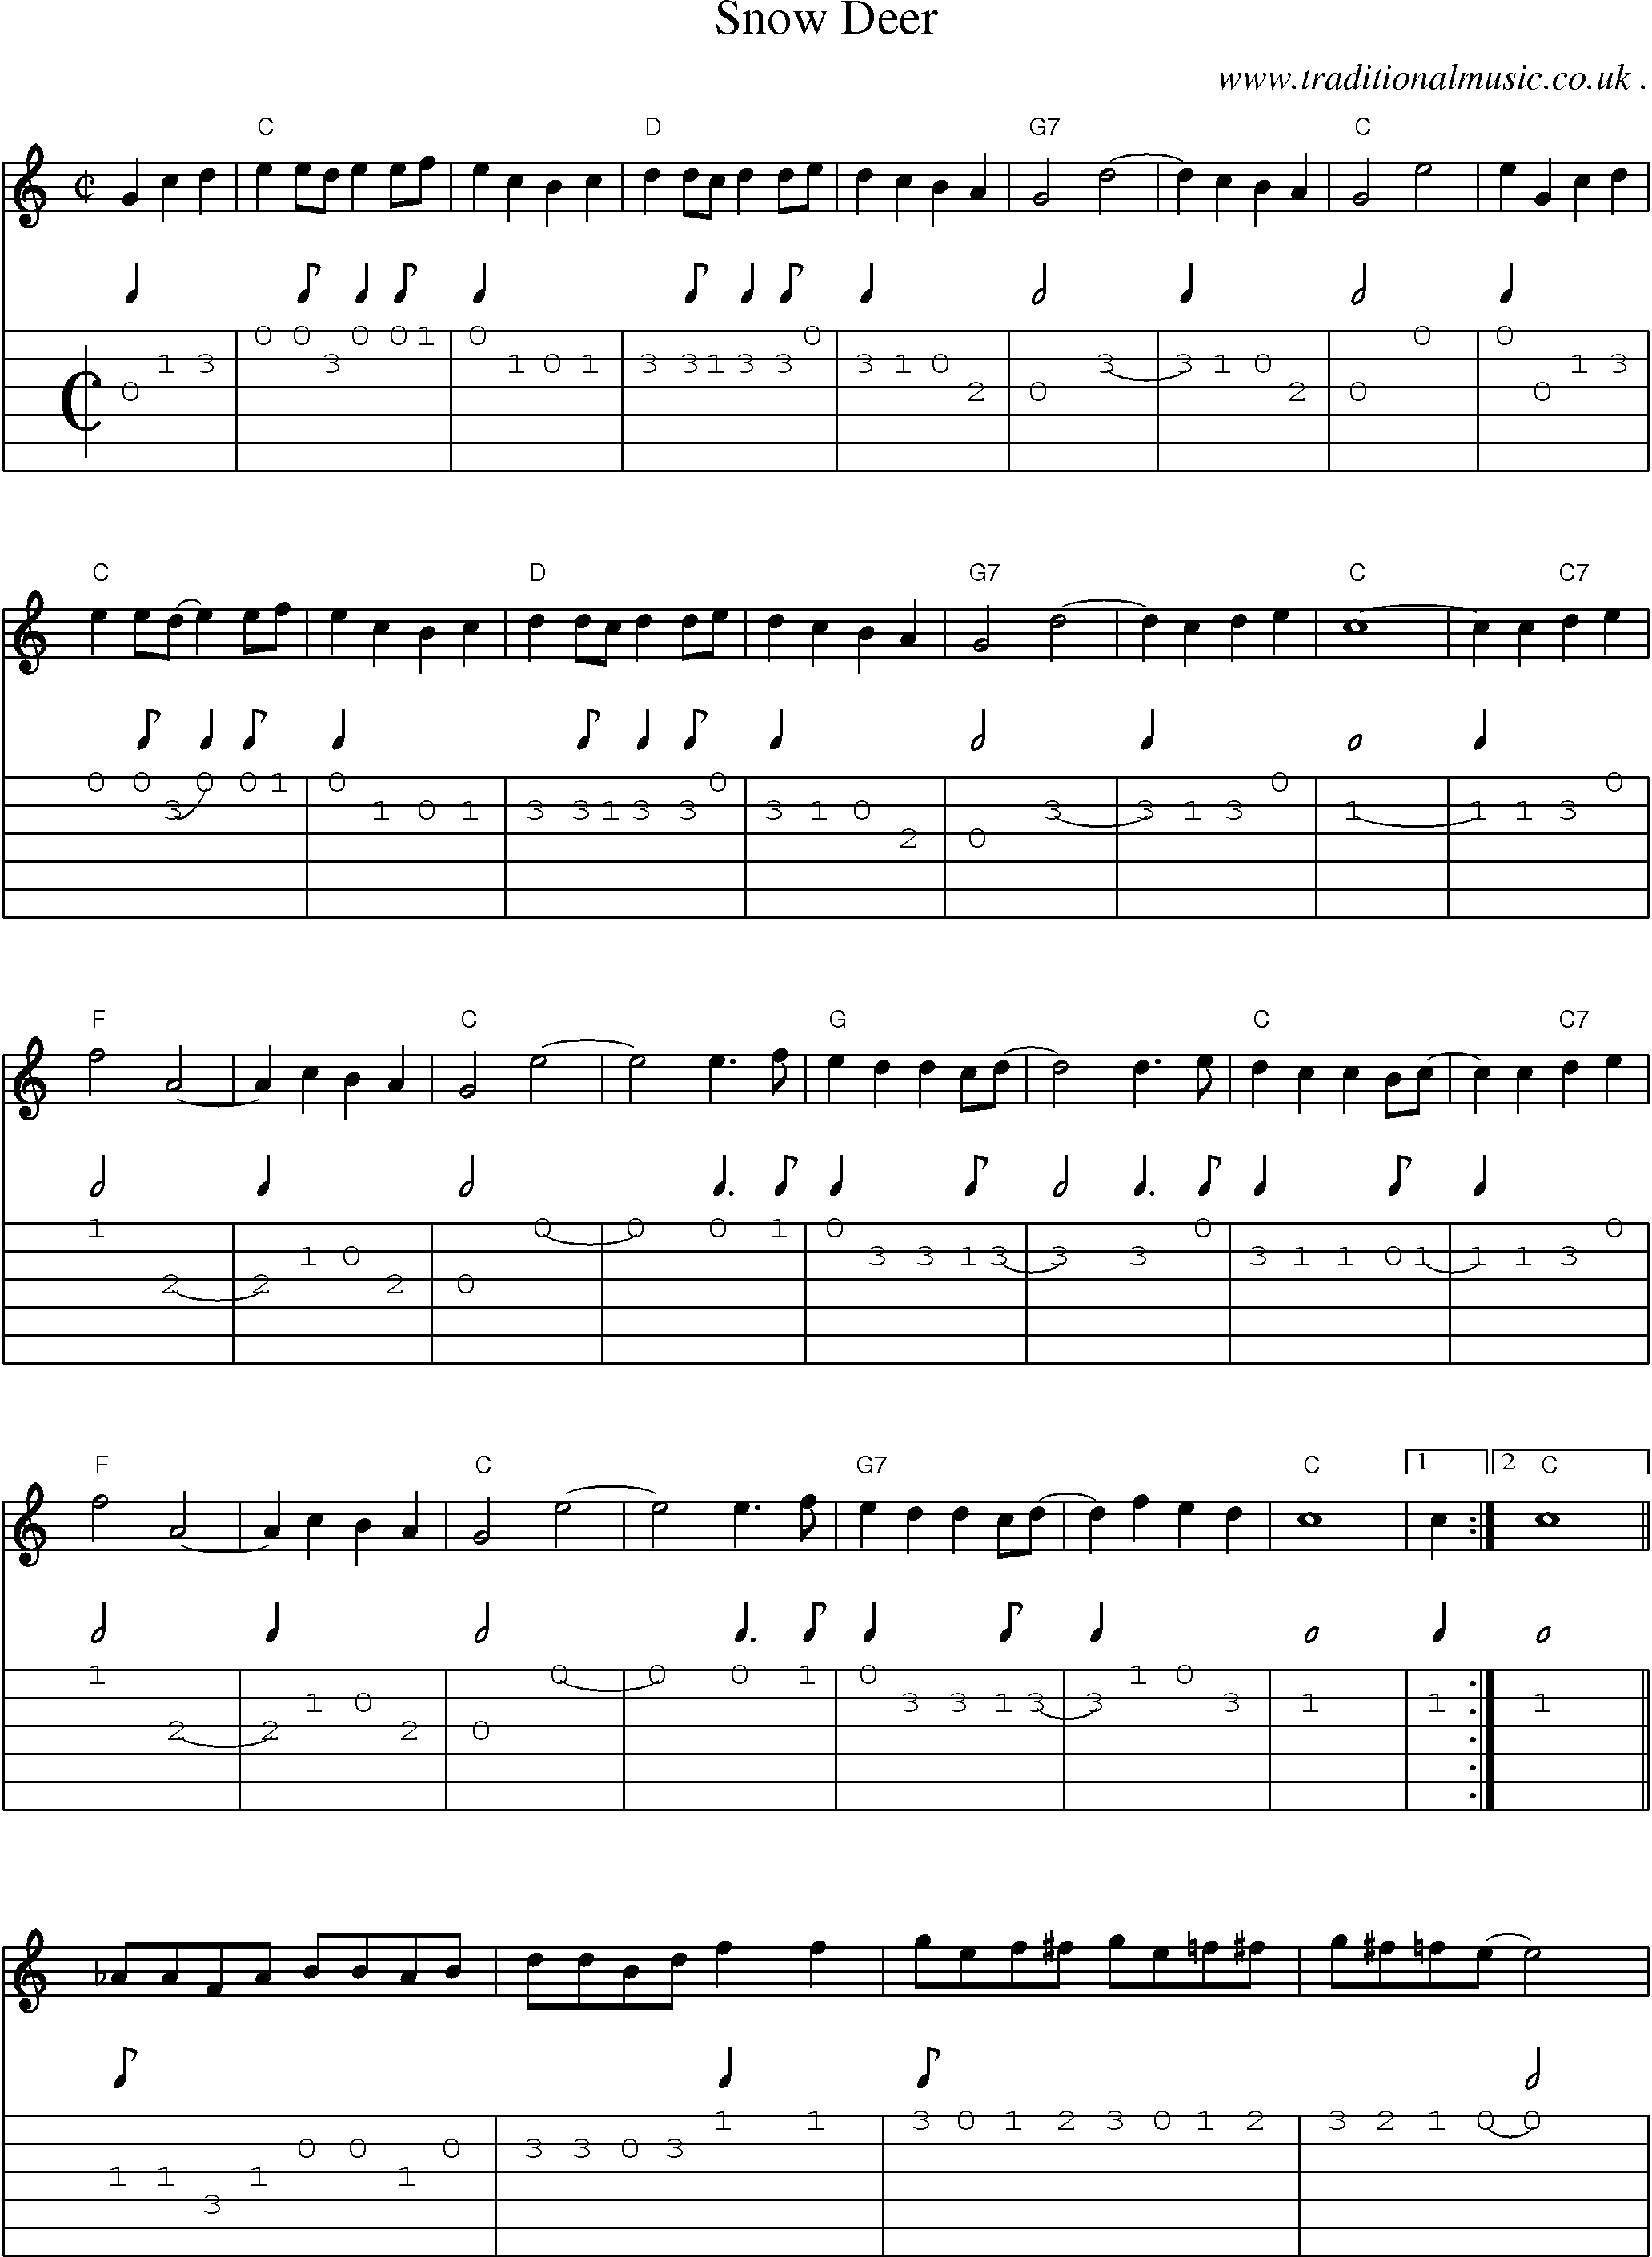 Music Score and Guitar Tabs for Snow Deer